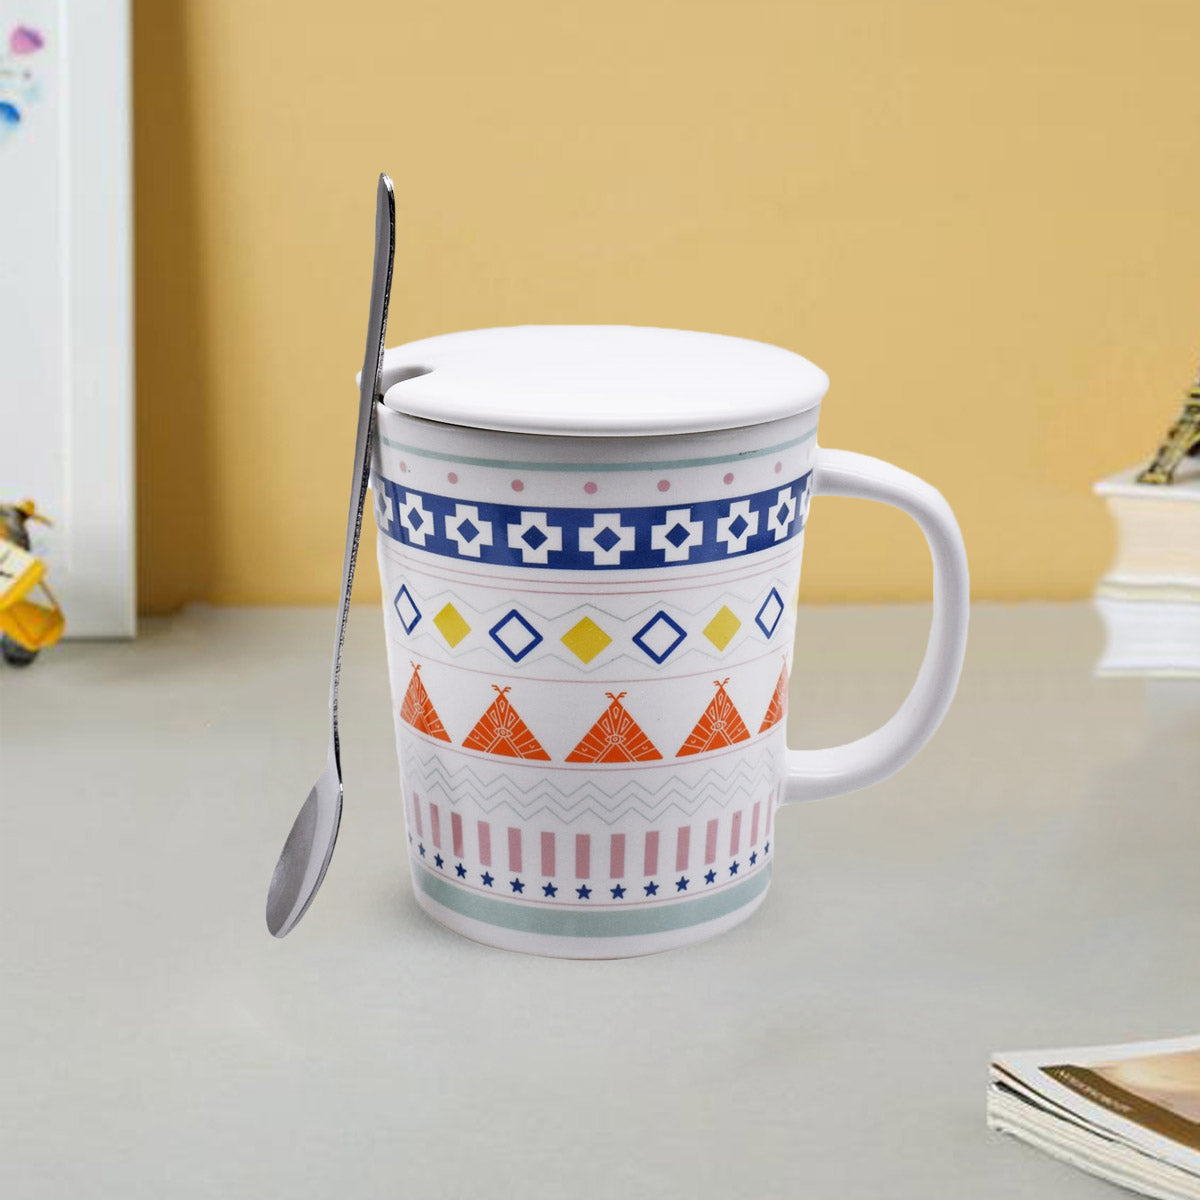 Fancy Ceramic Coffee or Tea Mug with Lid and Handle with Spoon (8535)